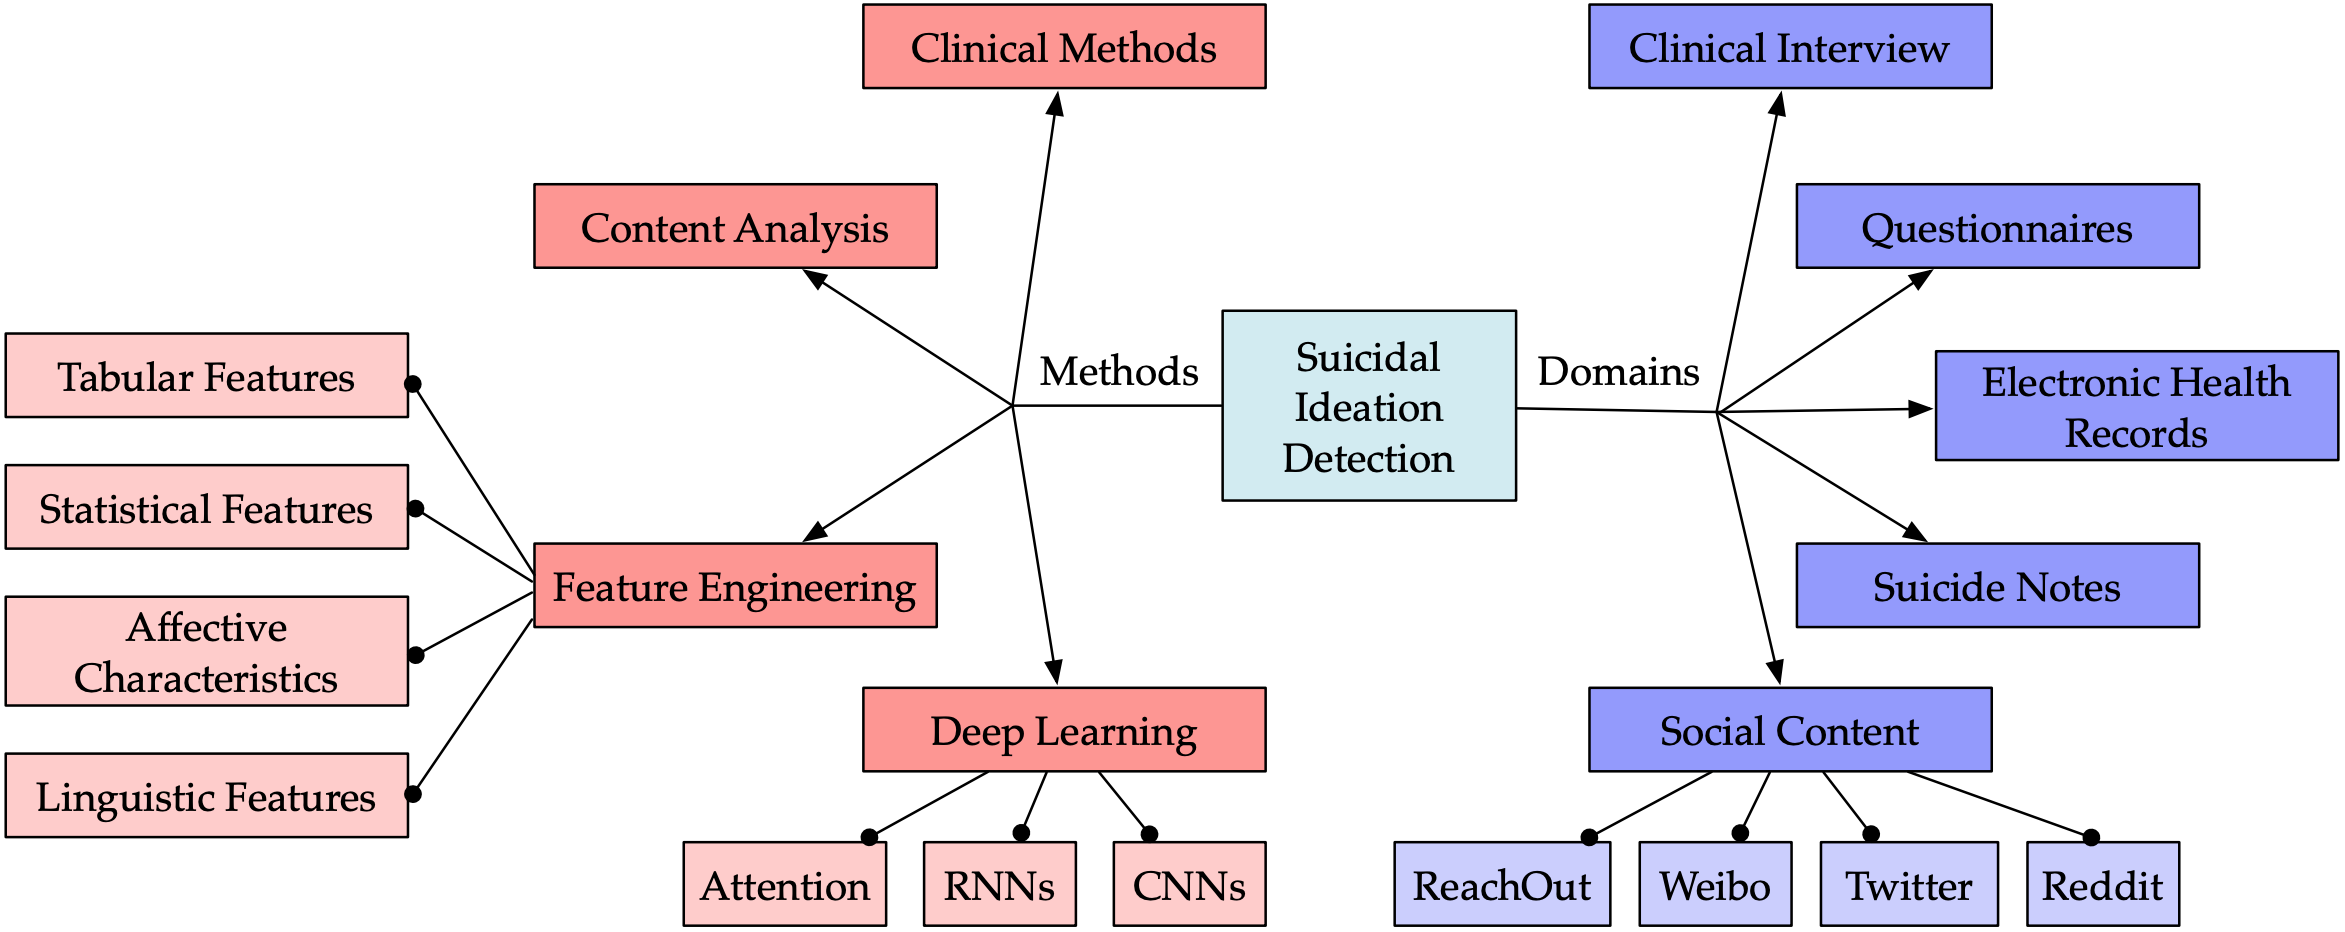 suicidal ideation detection